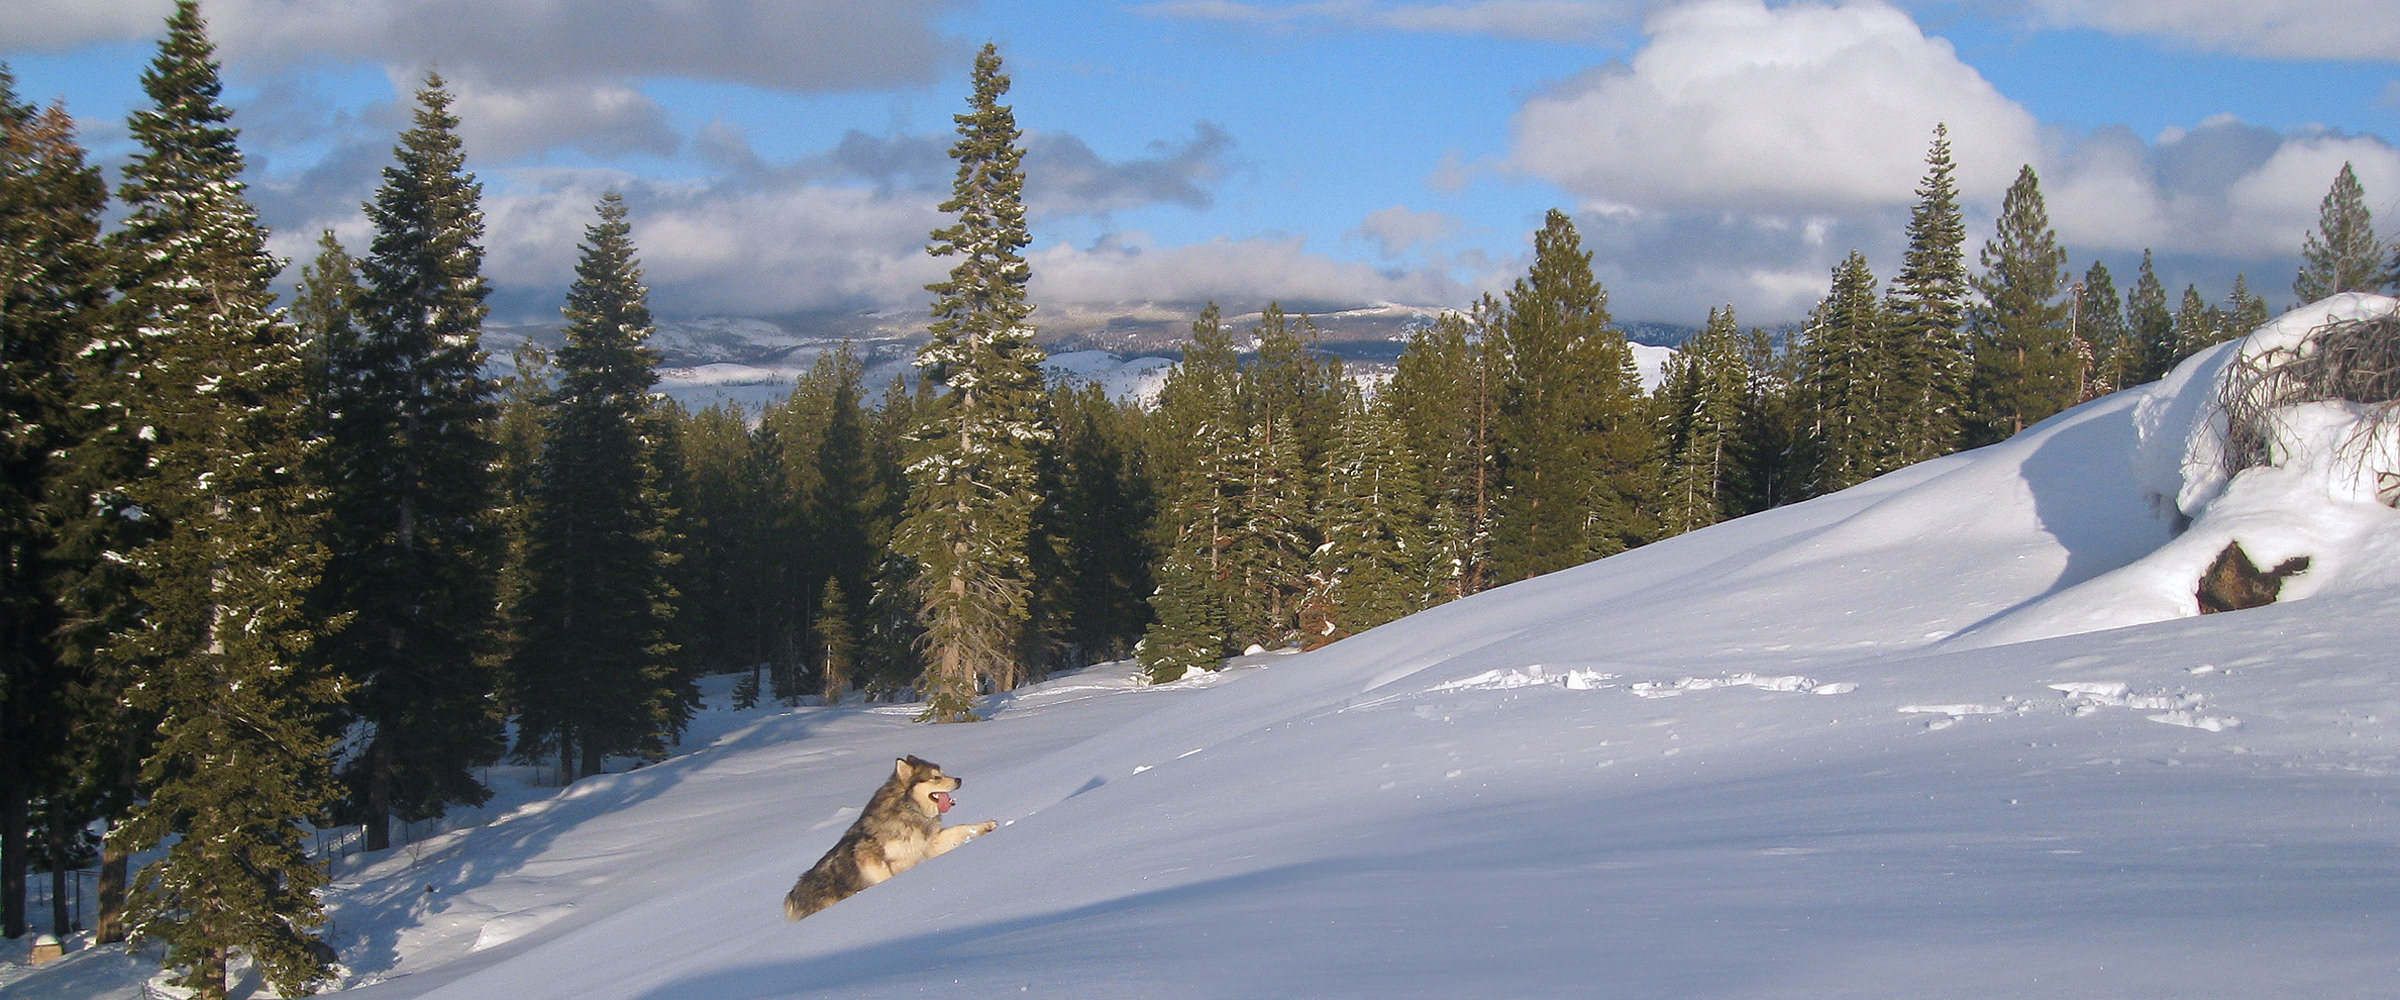 Champion male climbing snowy hill at Snowlion kennels